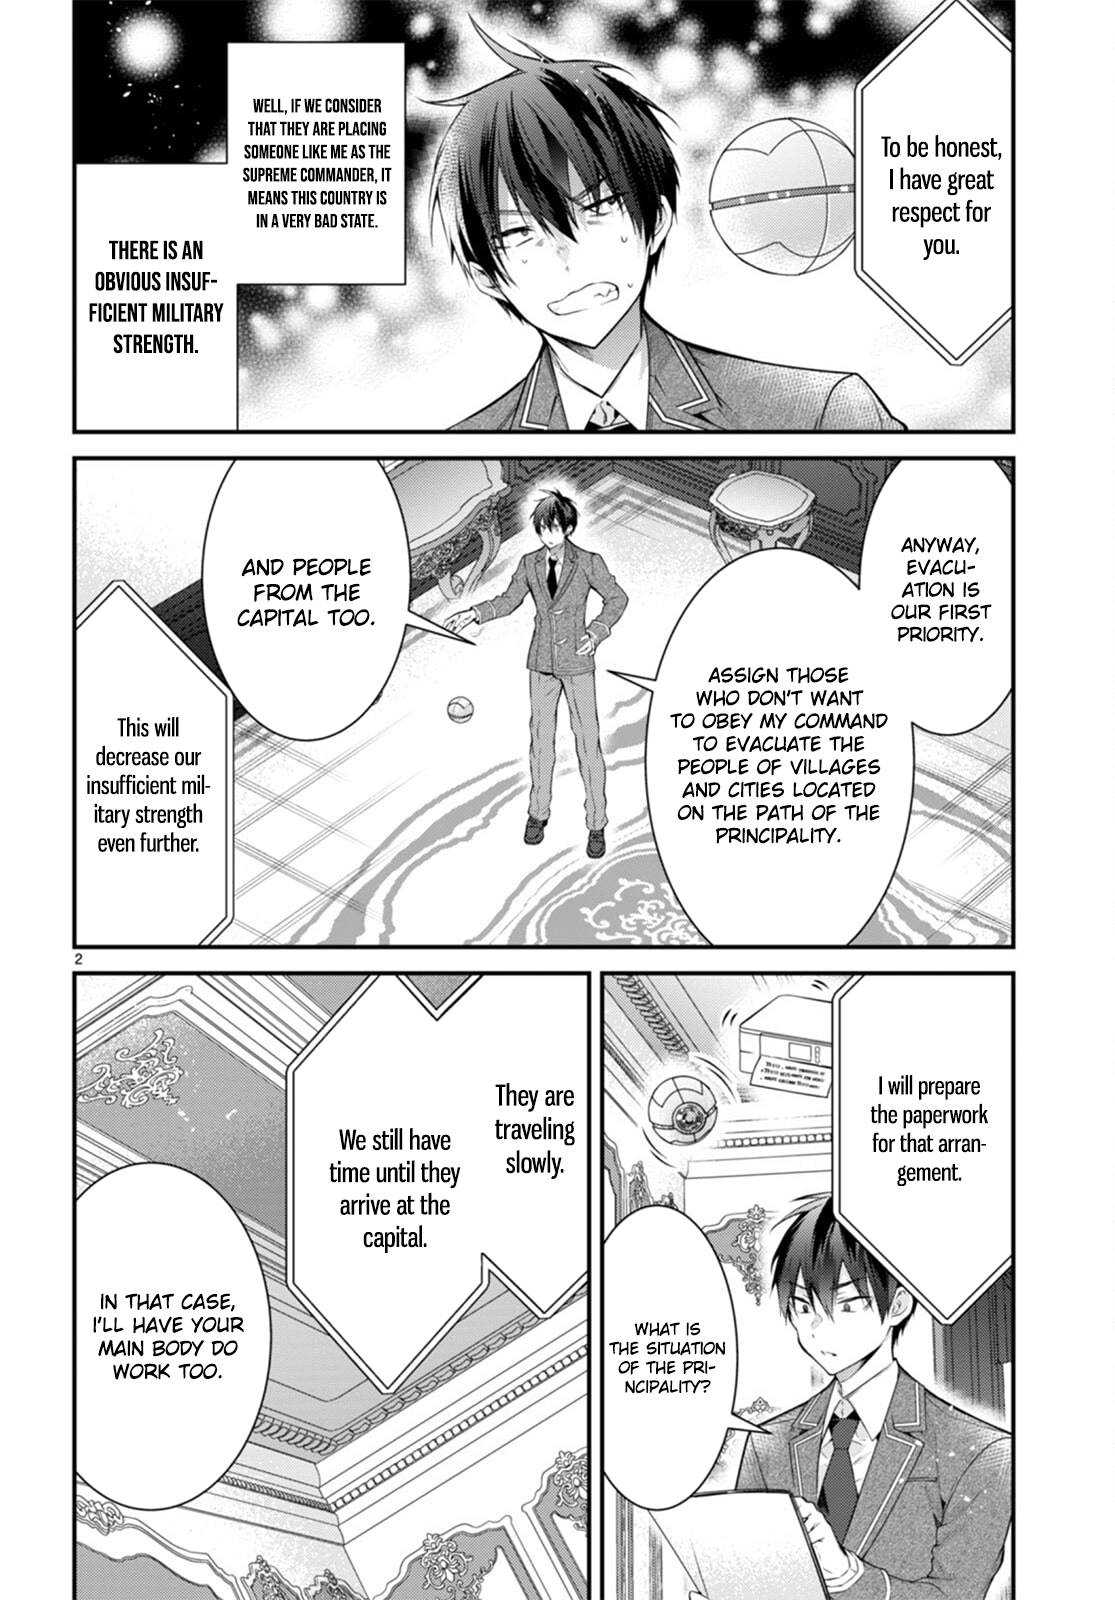 The World Of Otome Games Is Tough For Mobs - Page 3